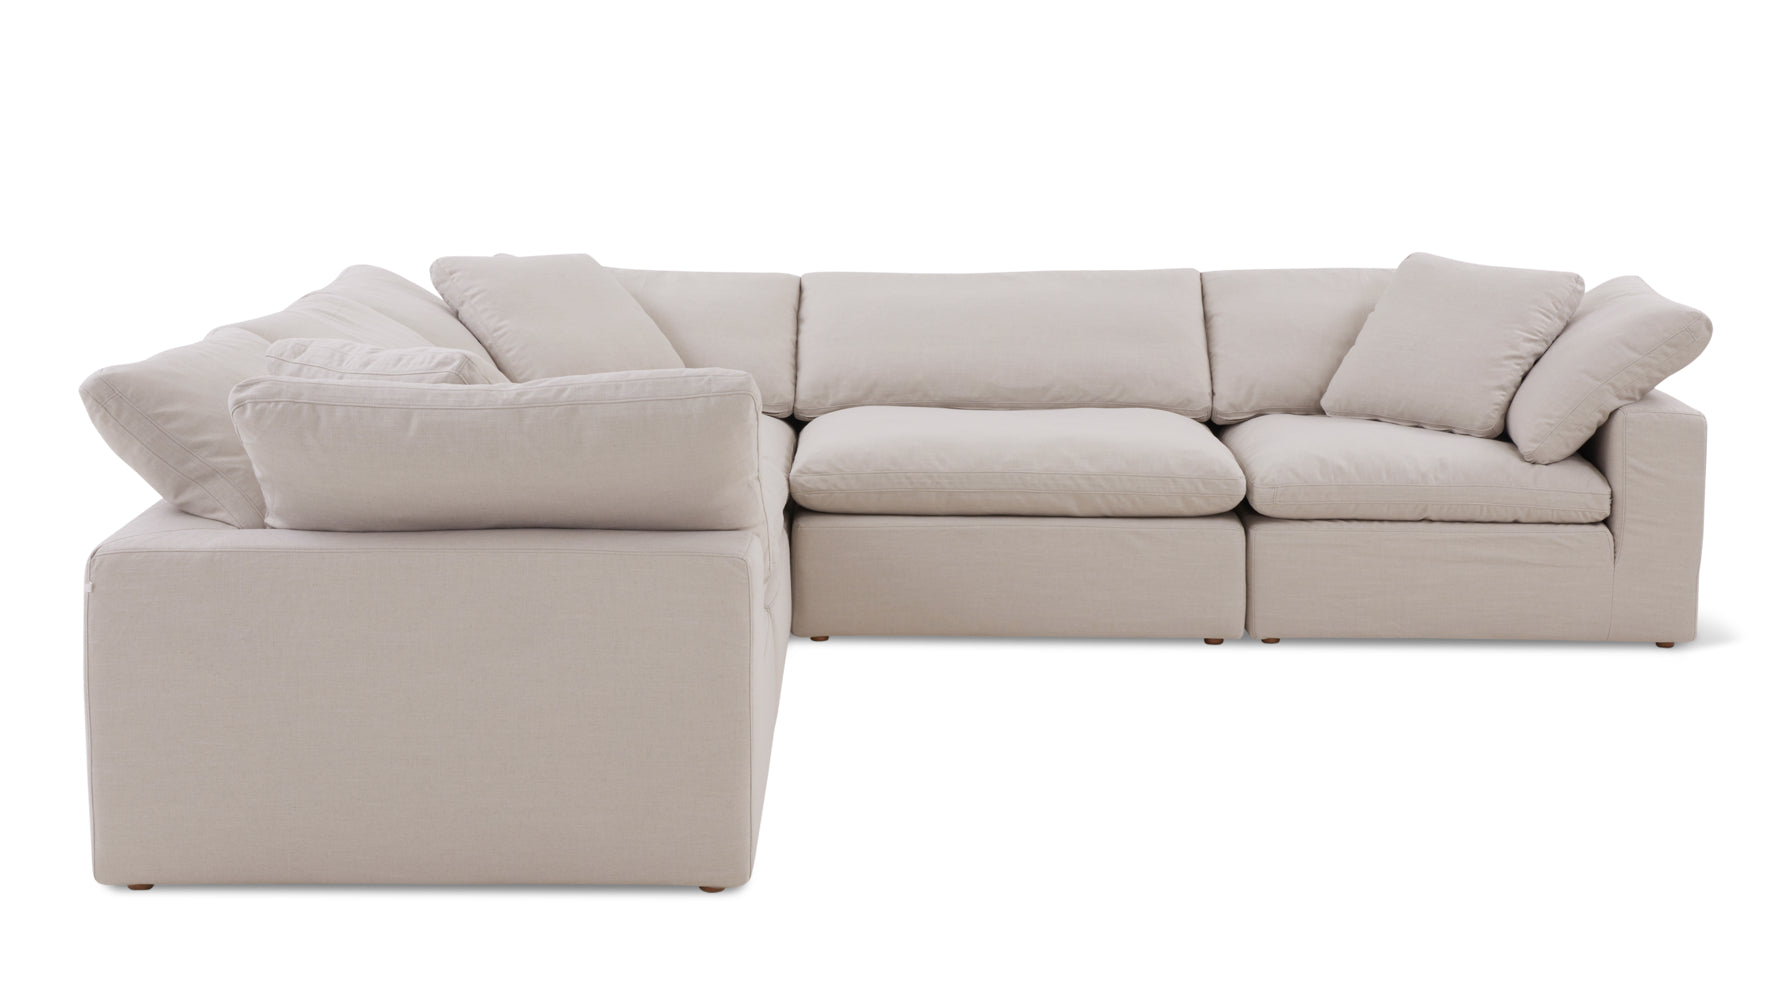 Movie Night™ 5-Piece Modular Sectional Closed, Large, Clay - Image 8